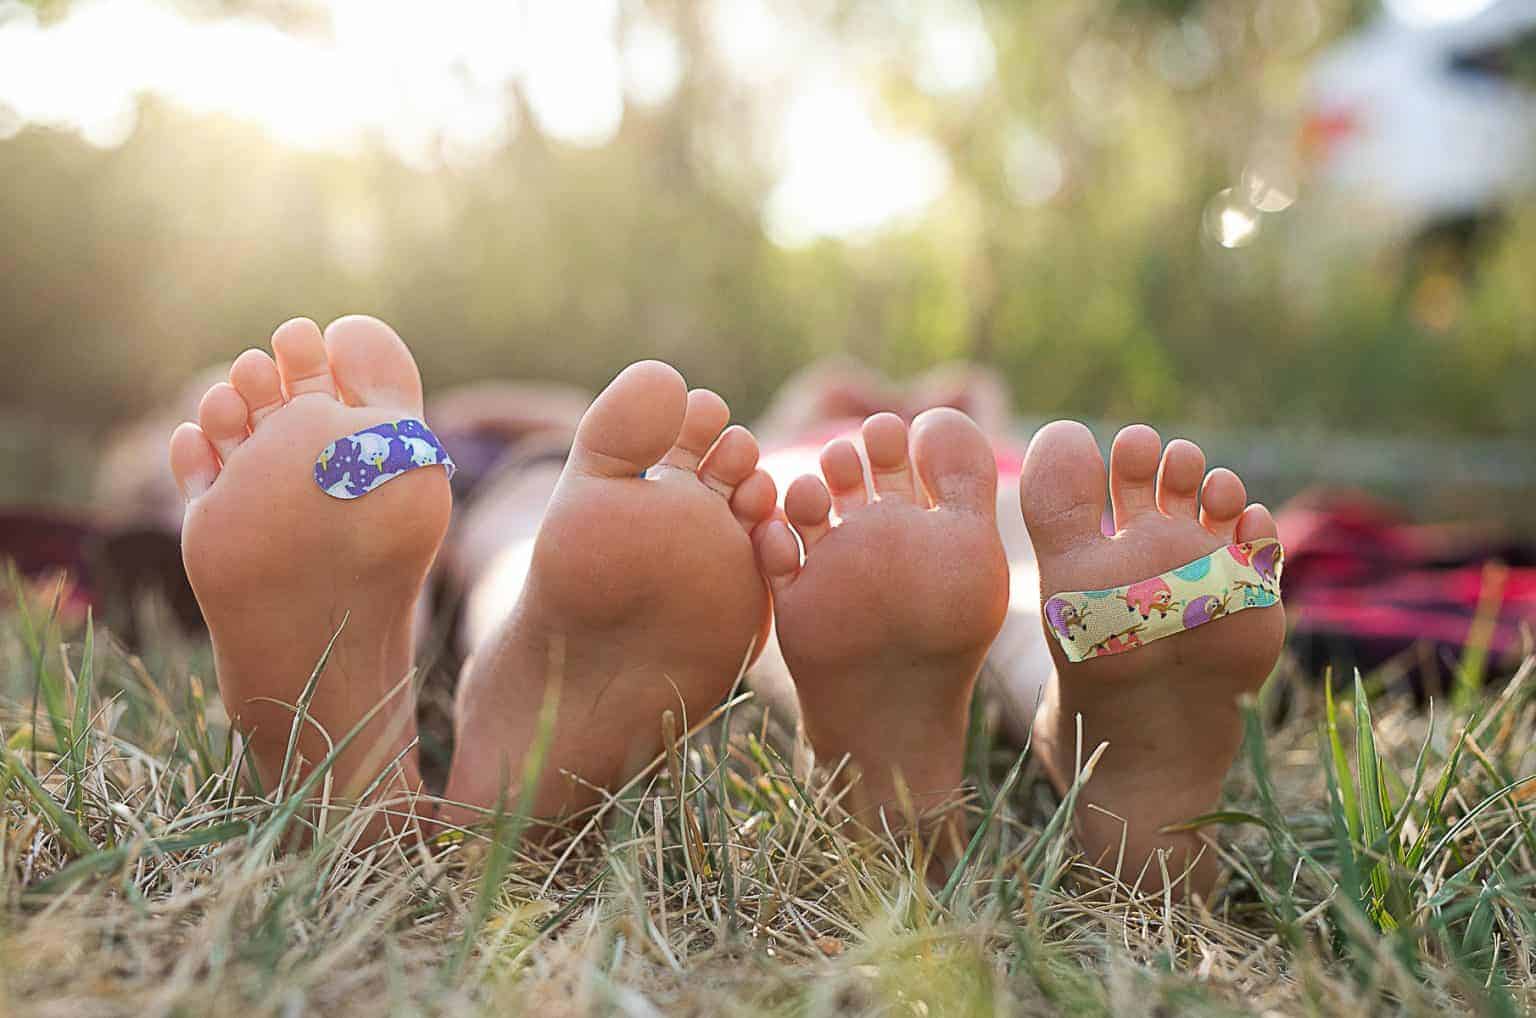 Hiking Safety - how to prevent blisters and how to treat them